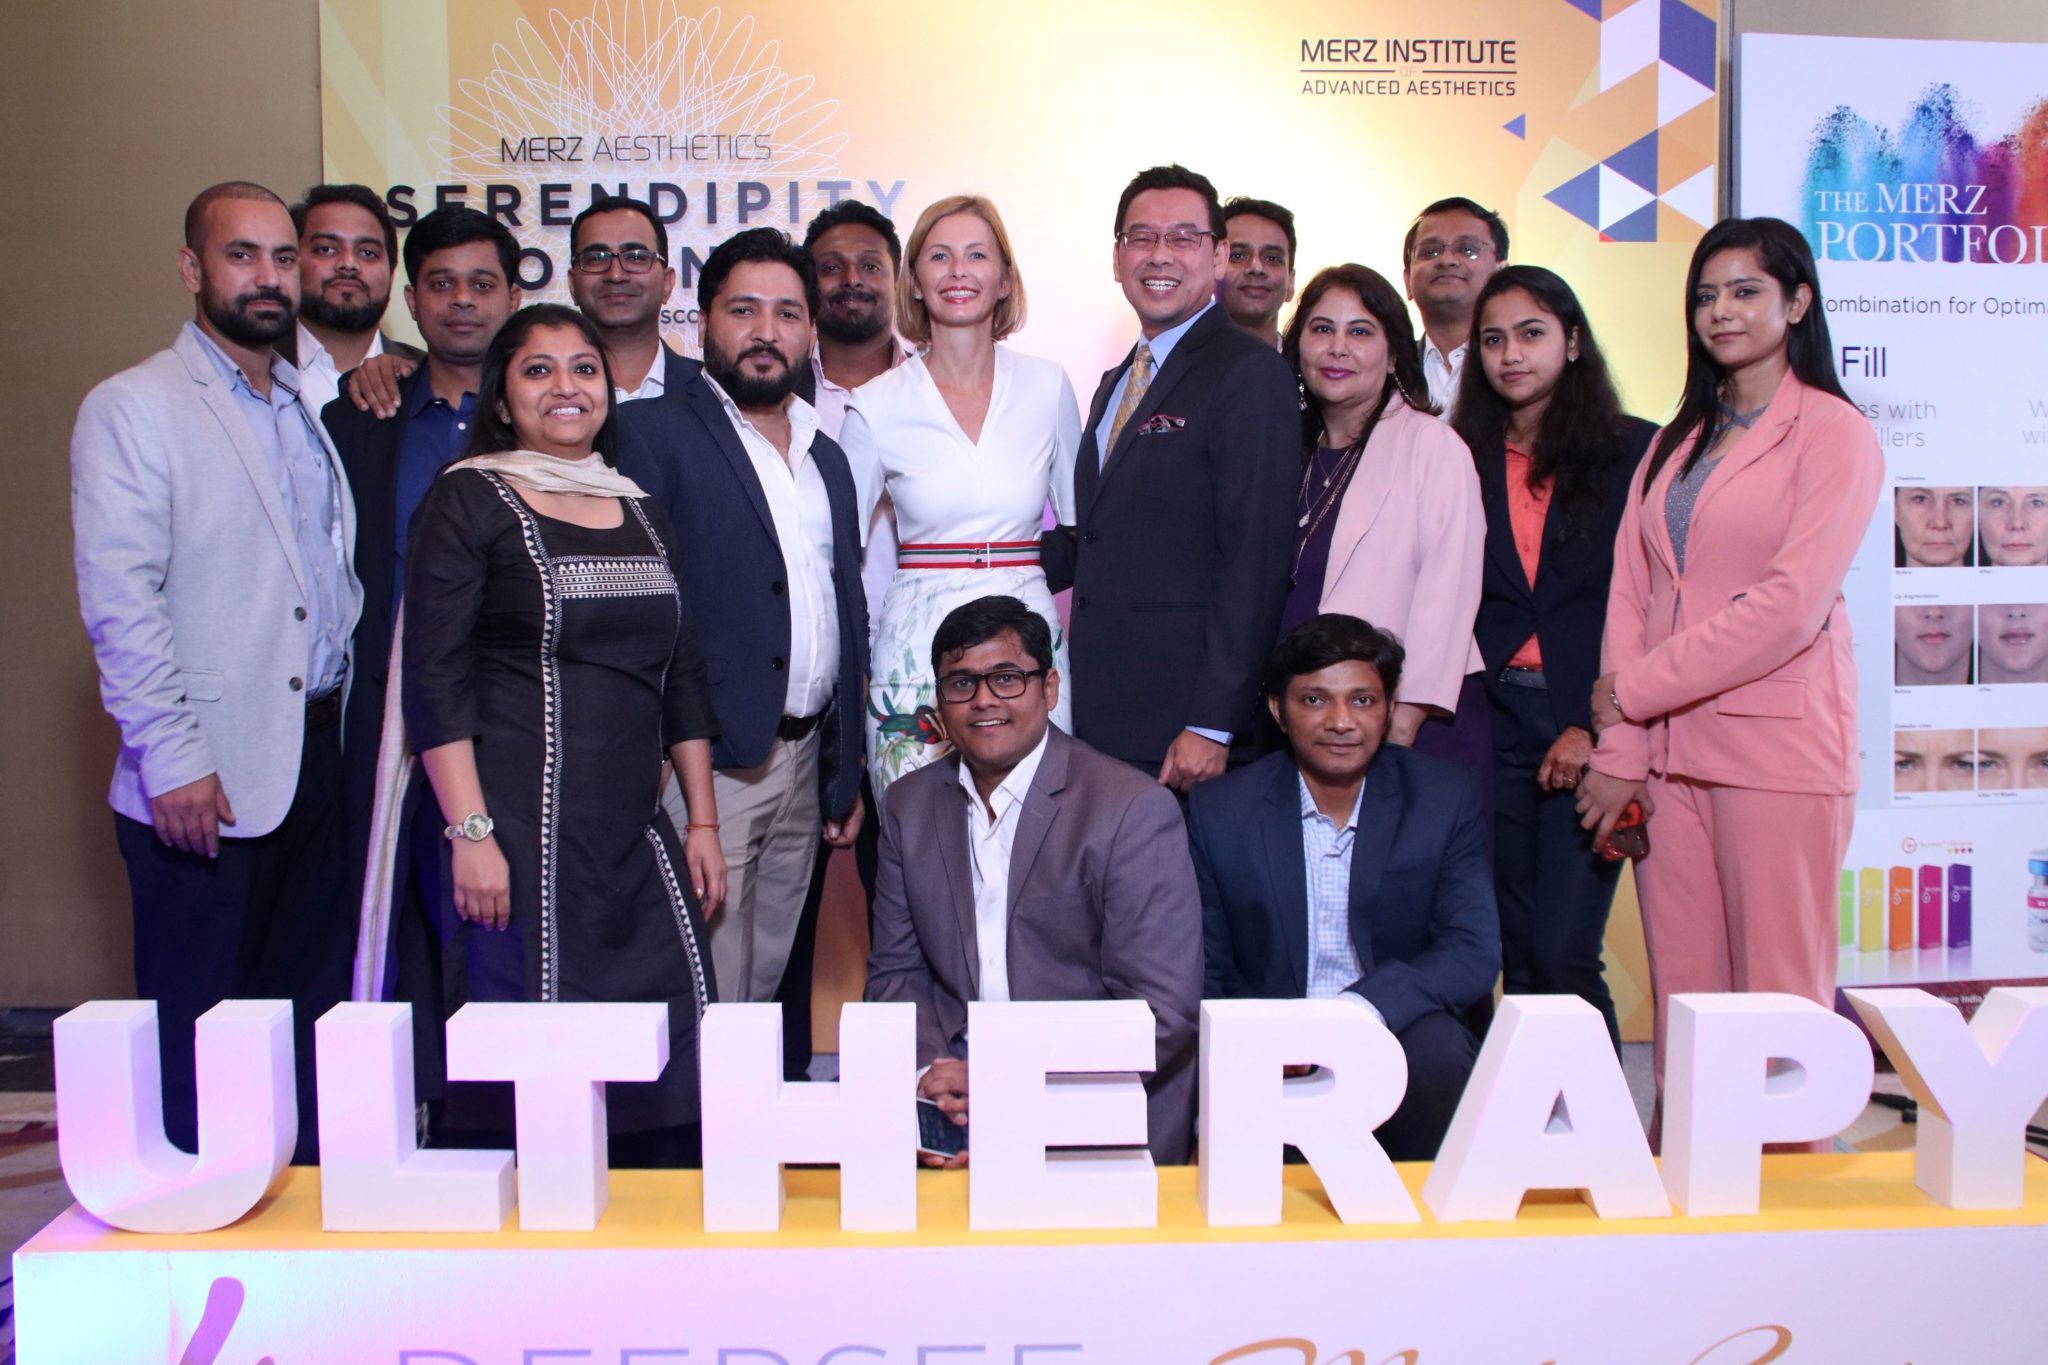 Talk of Hollywood A-listers and International beauty editors – Ultheraphy introduces evolved treatment protocol in India decoding=